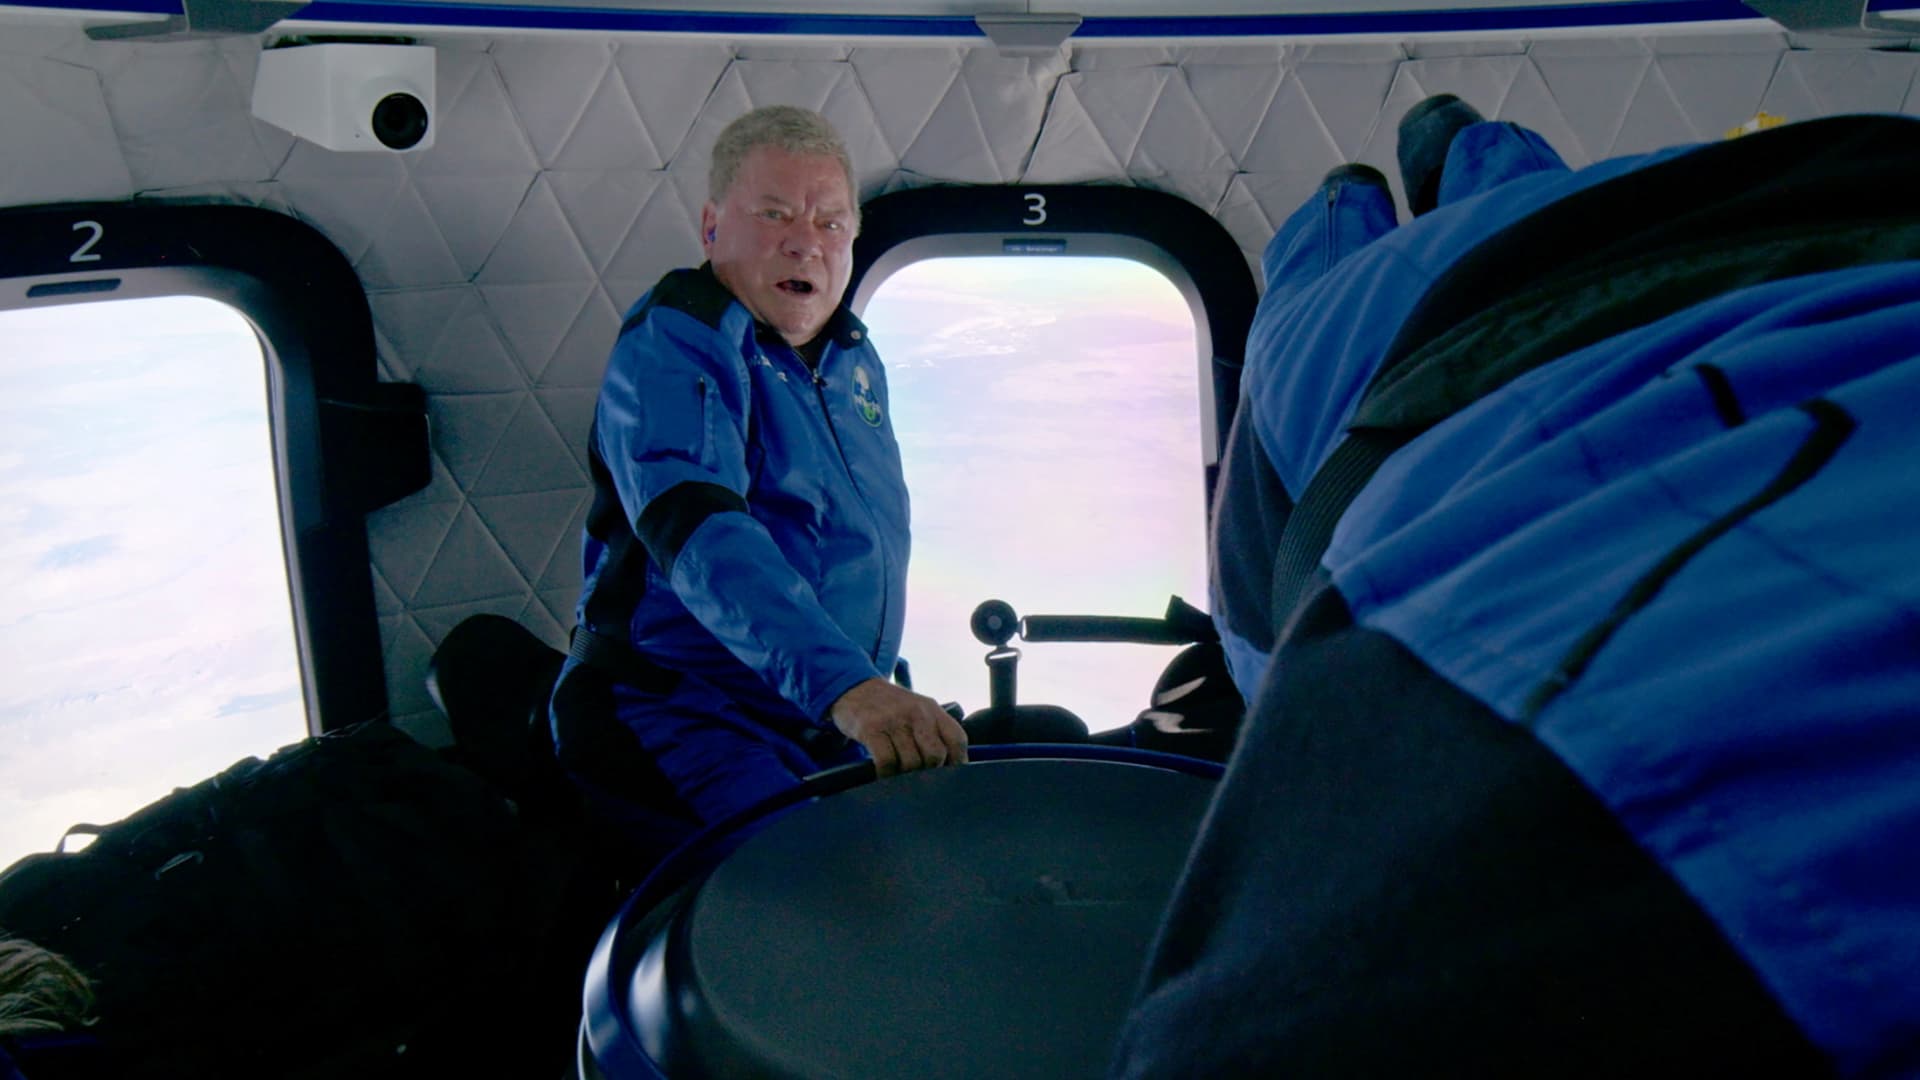 Star Trek actor William Shatner experiences weightlessness with three other passengers during the apogee of the Blue Origin New Shepard mission NS-18 suborbital flight near Van Horn, Texas, U.S. in a still image from video October 13, 2021.